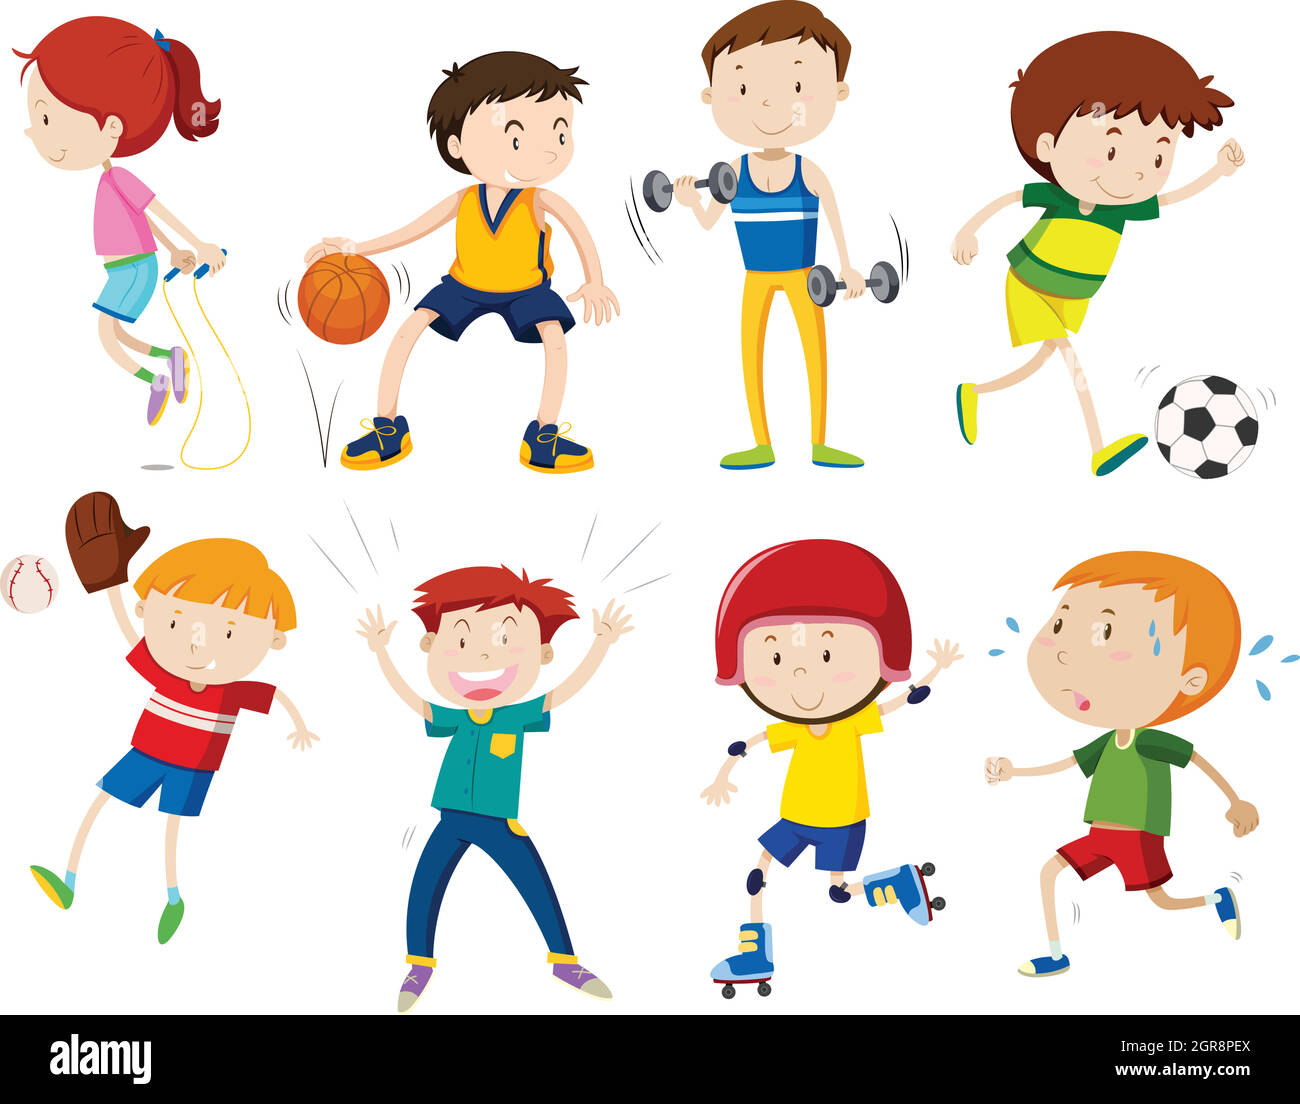 Child weight lifting Stock Vector Images - Alamy